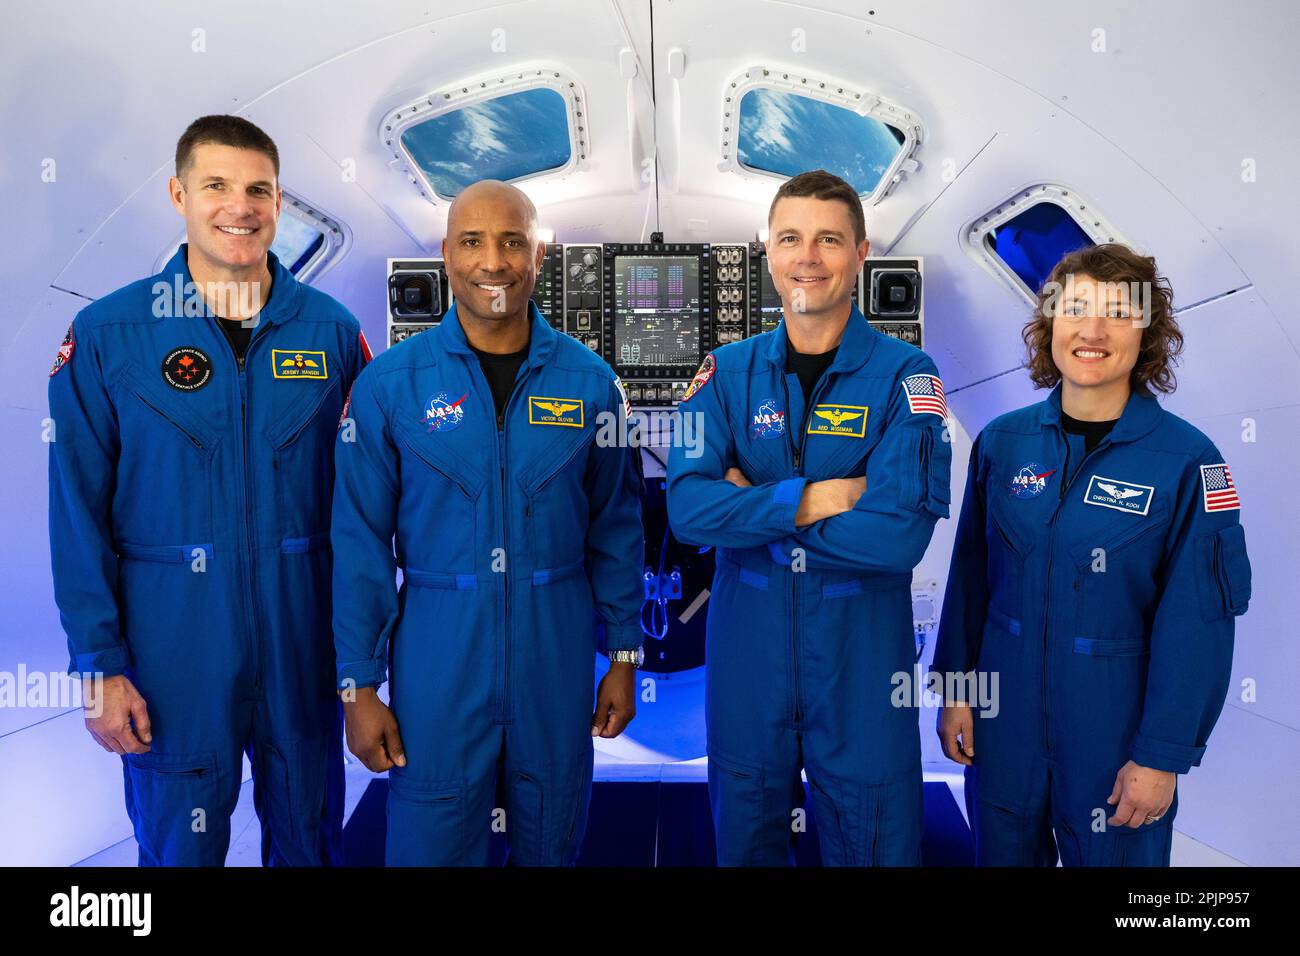 The crew of Artemis II (left to right): Canadian Space Agency astronaut Jeremy Hansen, NASA astronauts Victor Glover, Reid Wiseman, and Christina Hammock Koch, pose with the Orion simulator. NASA and the Canadian Space Agency (CSA) announced the four astronauts who will venture around the Moon on Artemis II, the first crewed mission on NASA's path to establishing a long-term presence on the Moon, during an event on Monday, April 3, 2023, at Ellington Field near NASA's Johnson Space Center in Houston. NASA Photo by James Blair/UPI Stock Photo